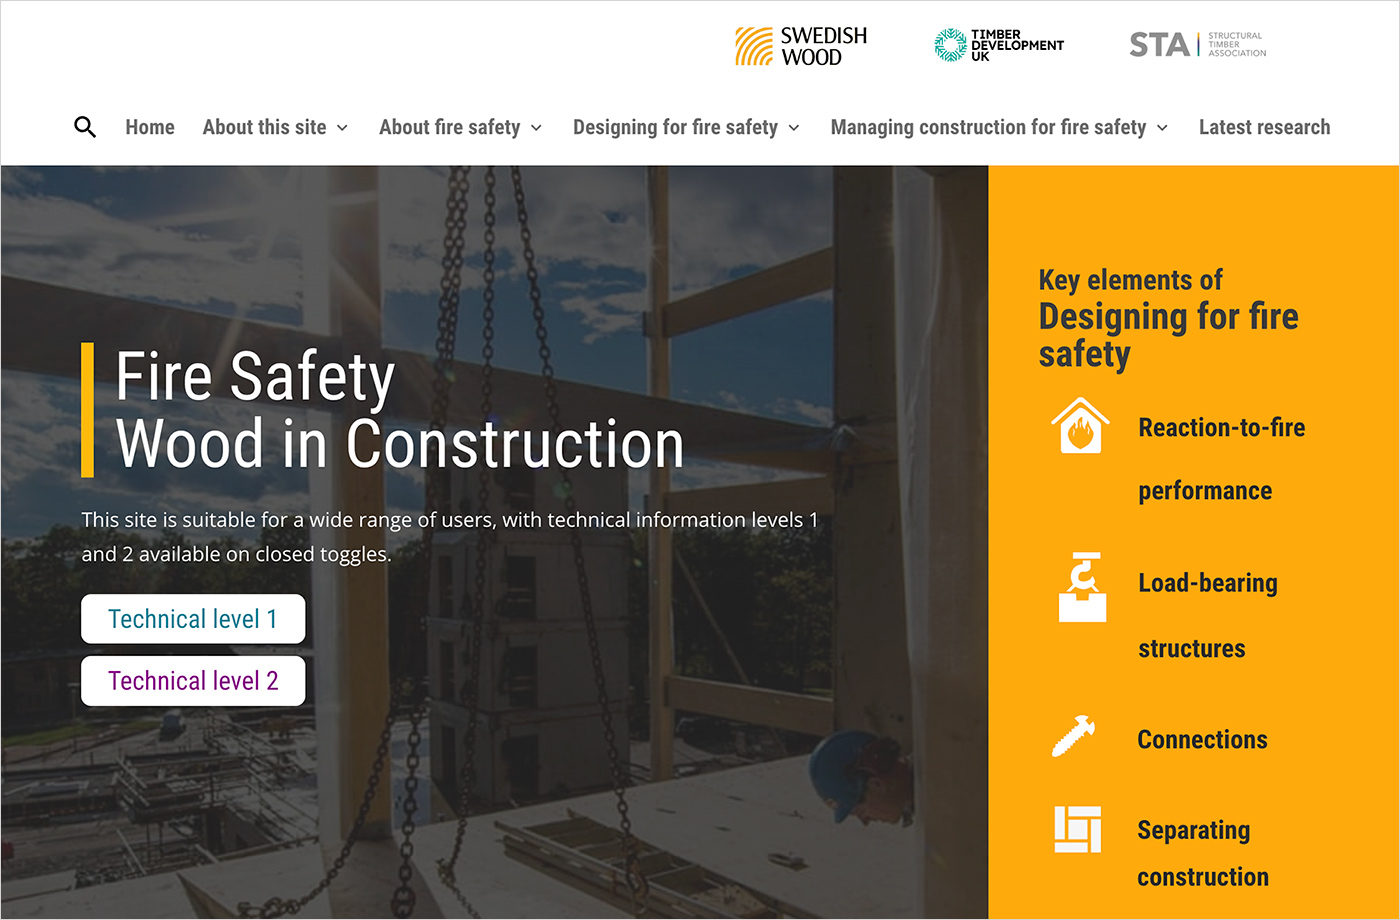 Fire safety, wood in construction